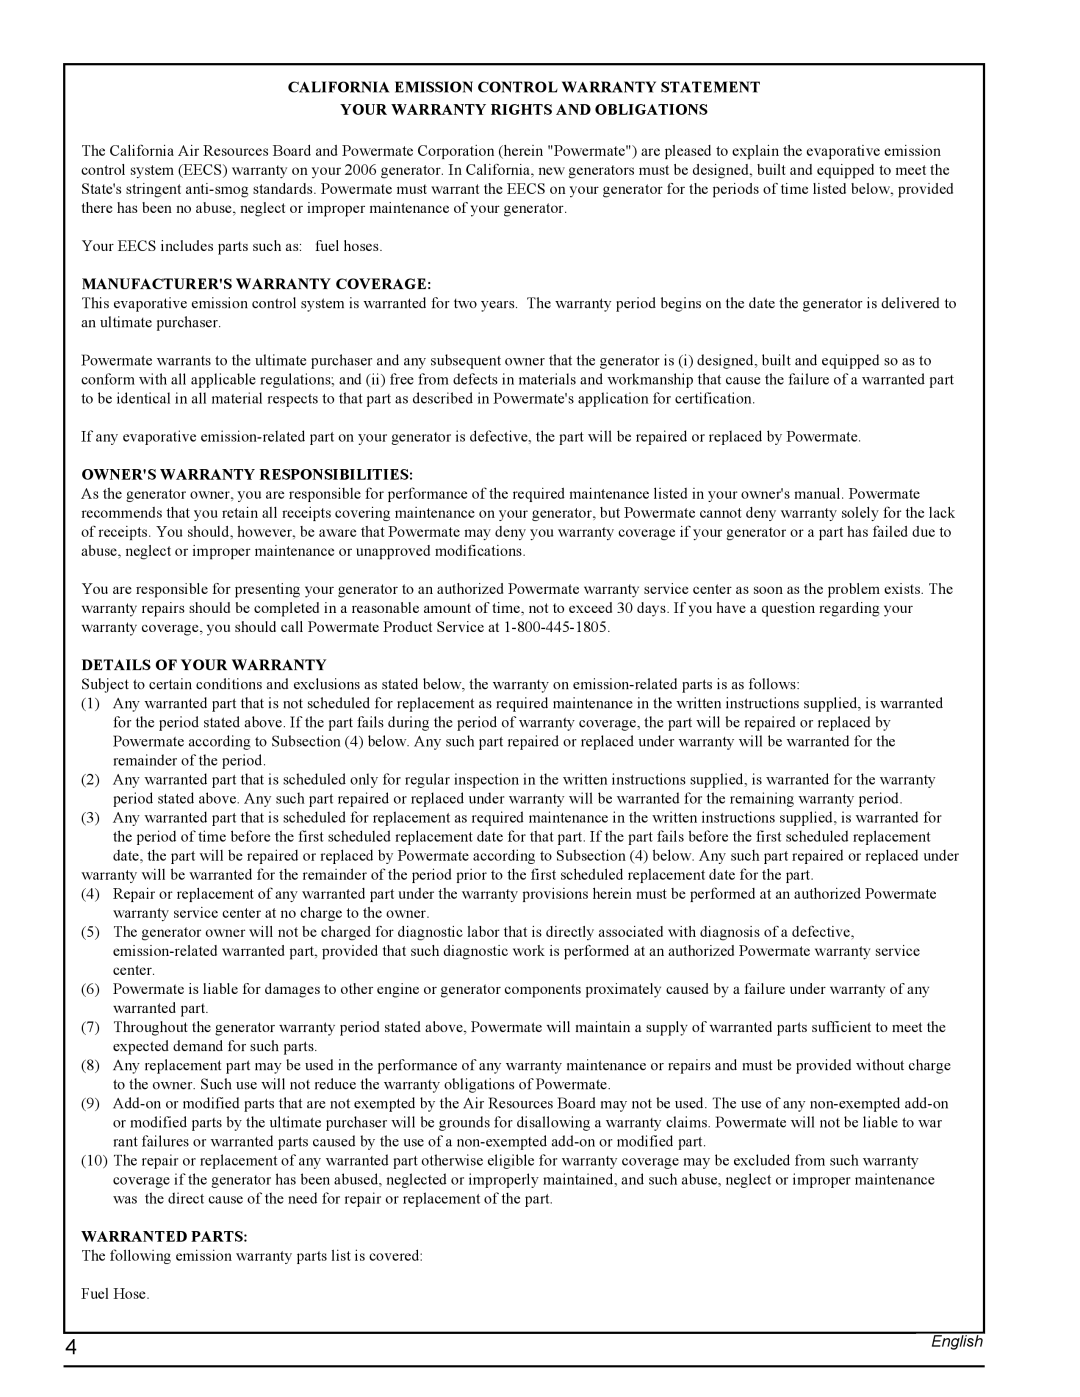 Powermate PMC435001 California Emission Control Warranty Statement, Your Warranty Rights And Obligations, Warranted Parts 